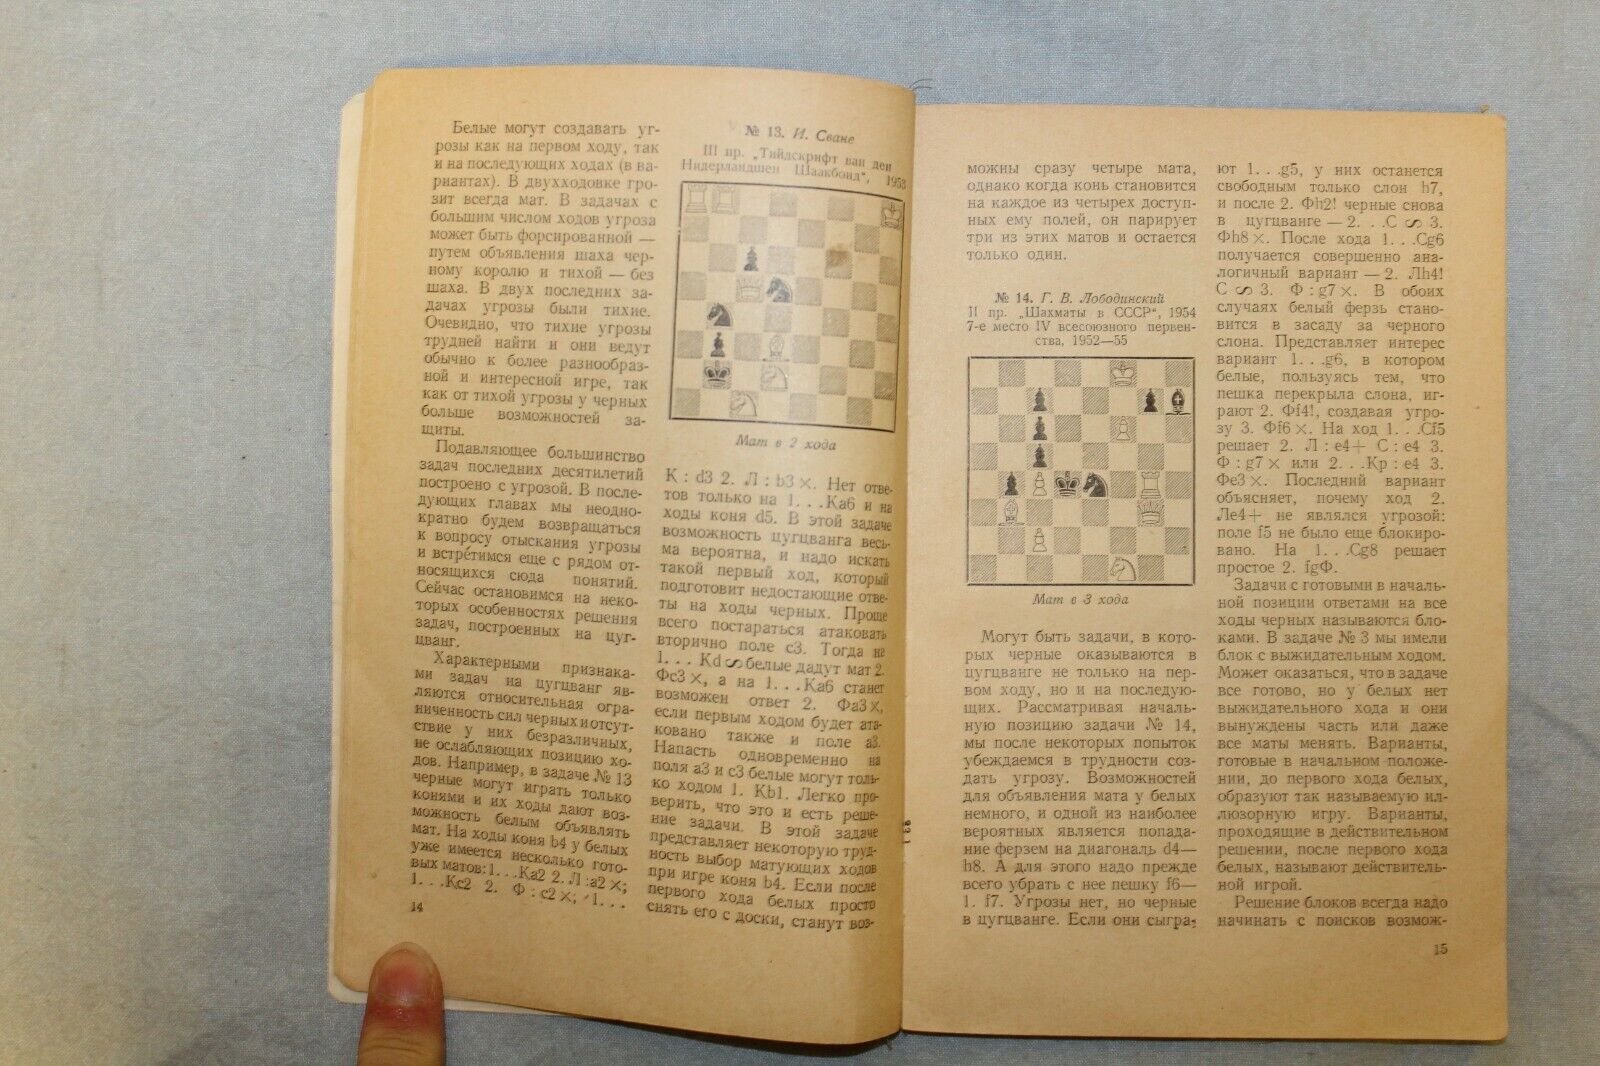 11026.Chess Book signed by Y.Umnov to Zvorykina. Solution of Chess Tasks. 1958